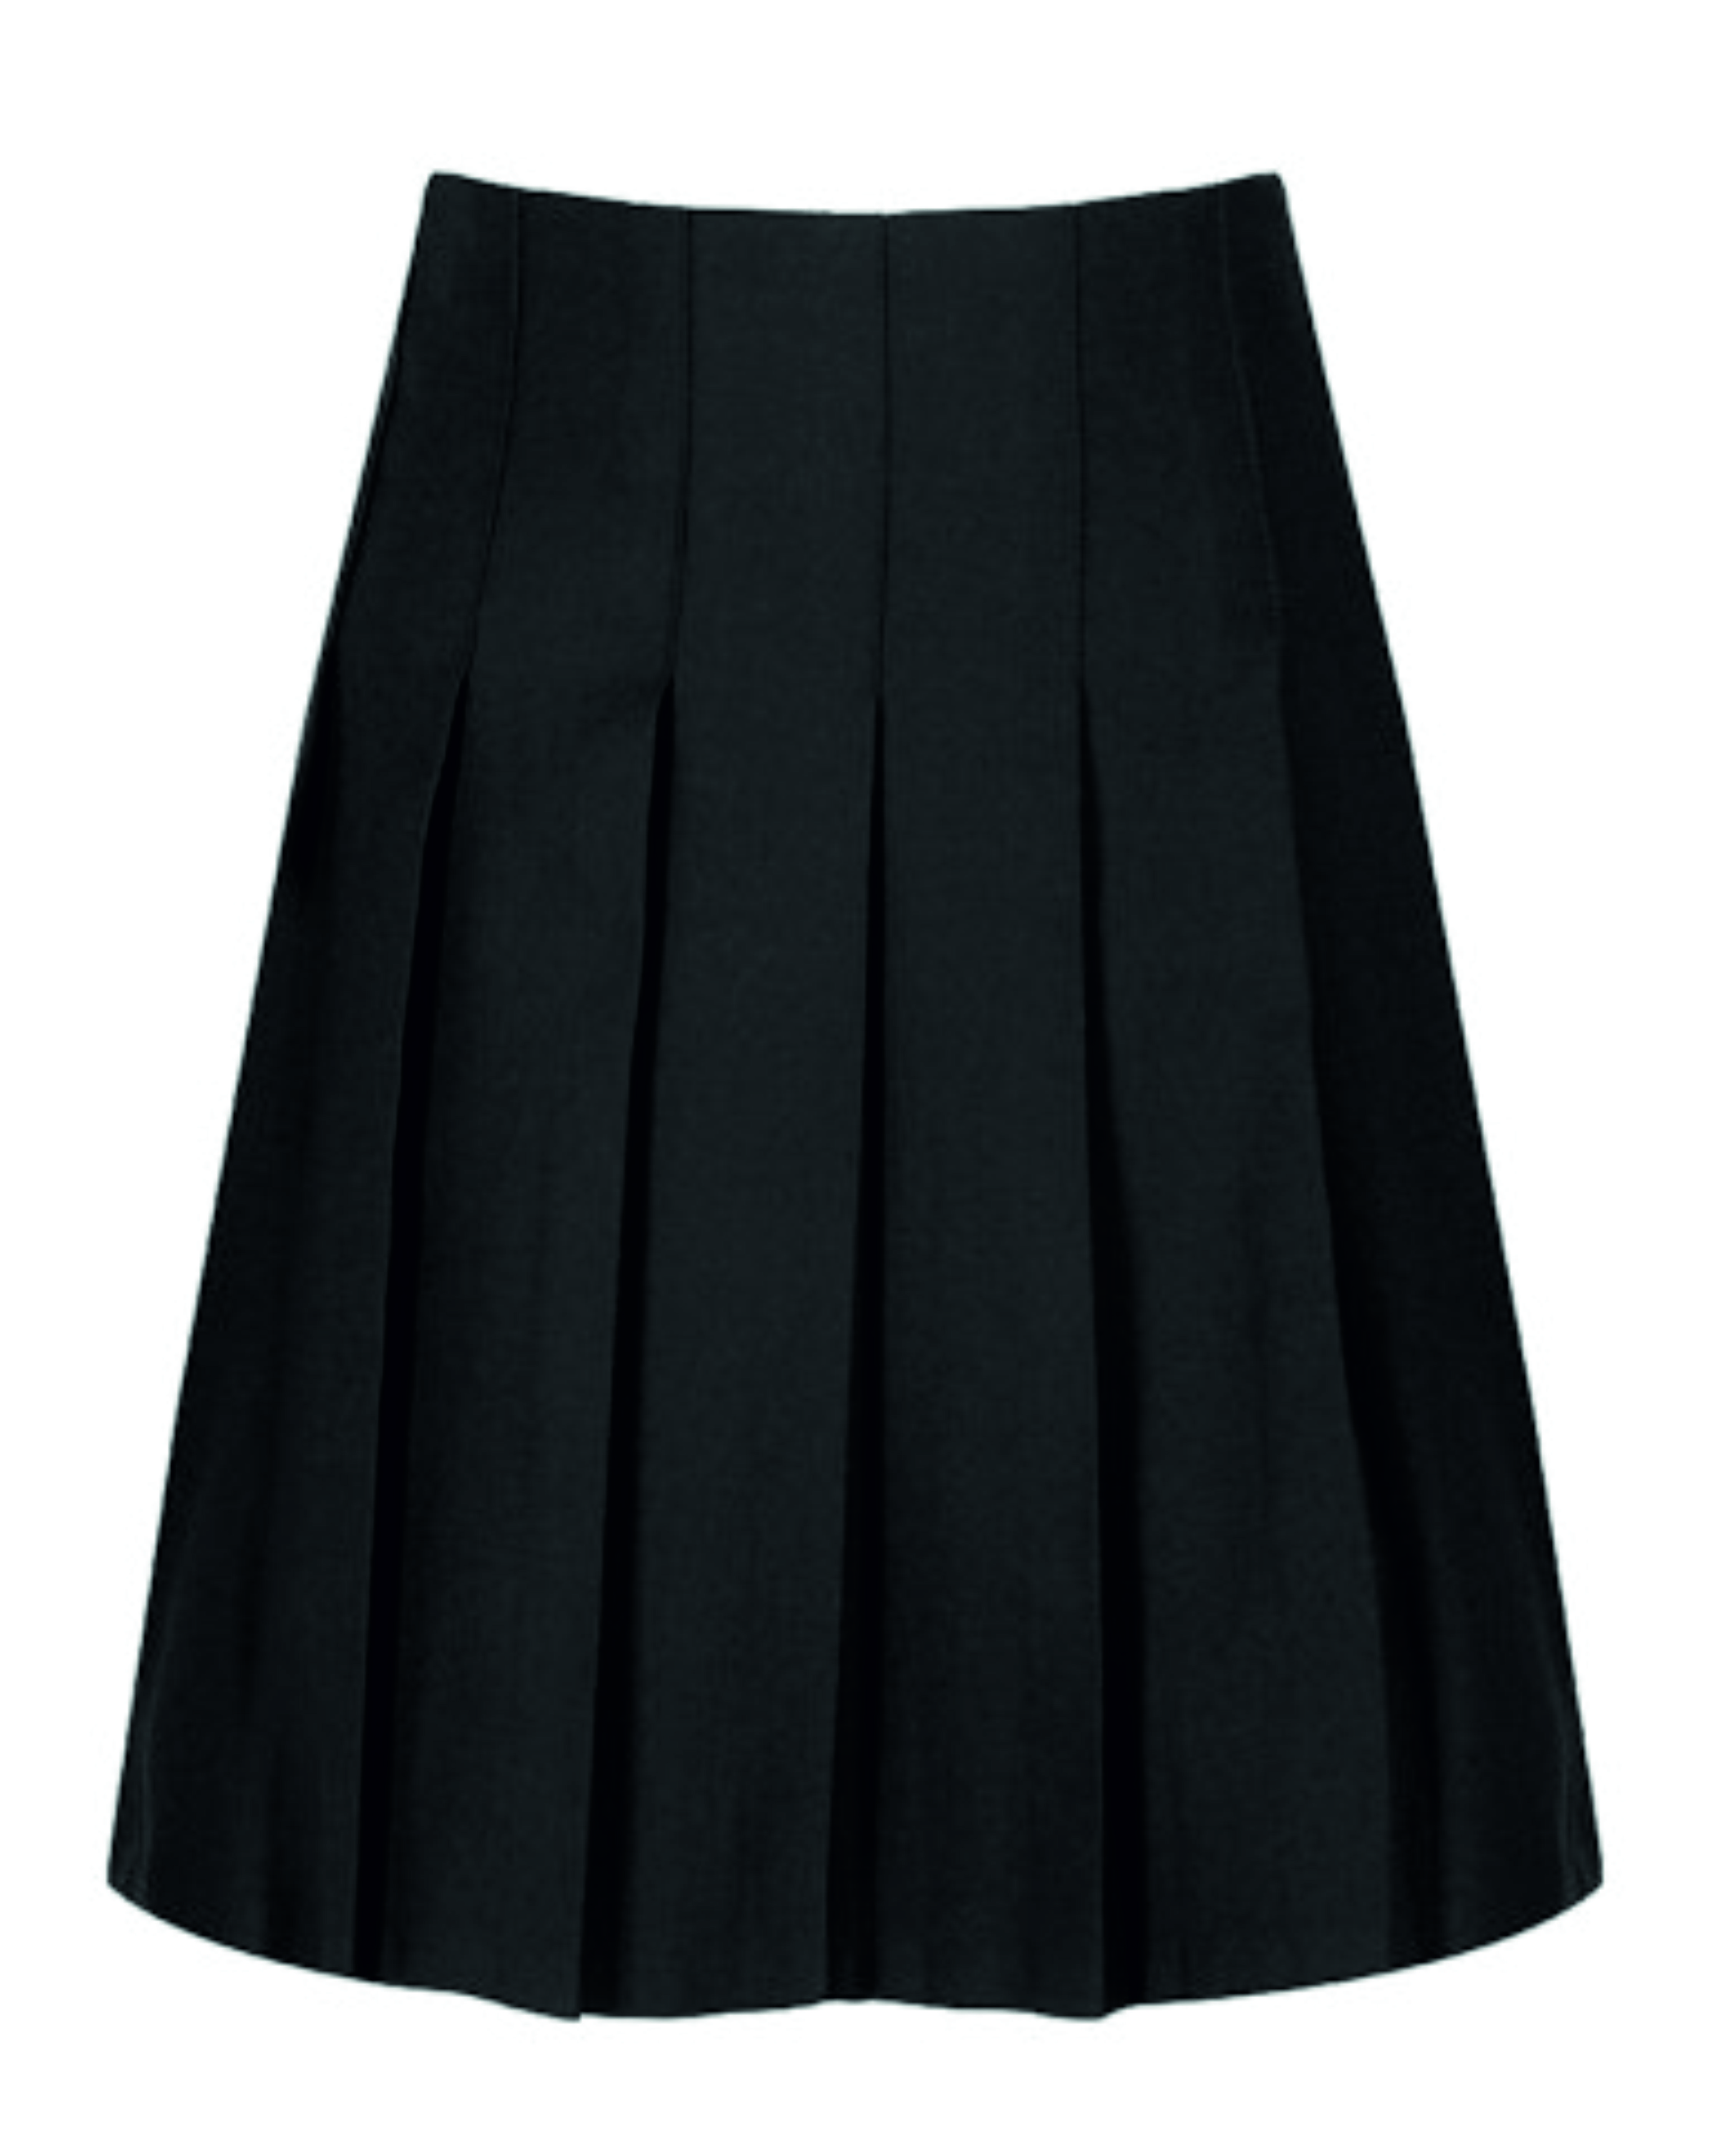 Middlezoy School Stitched Down Grey Pleat Skirt | Jual Branded Clothing ...